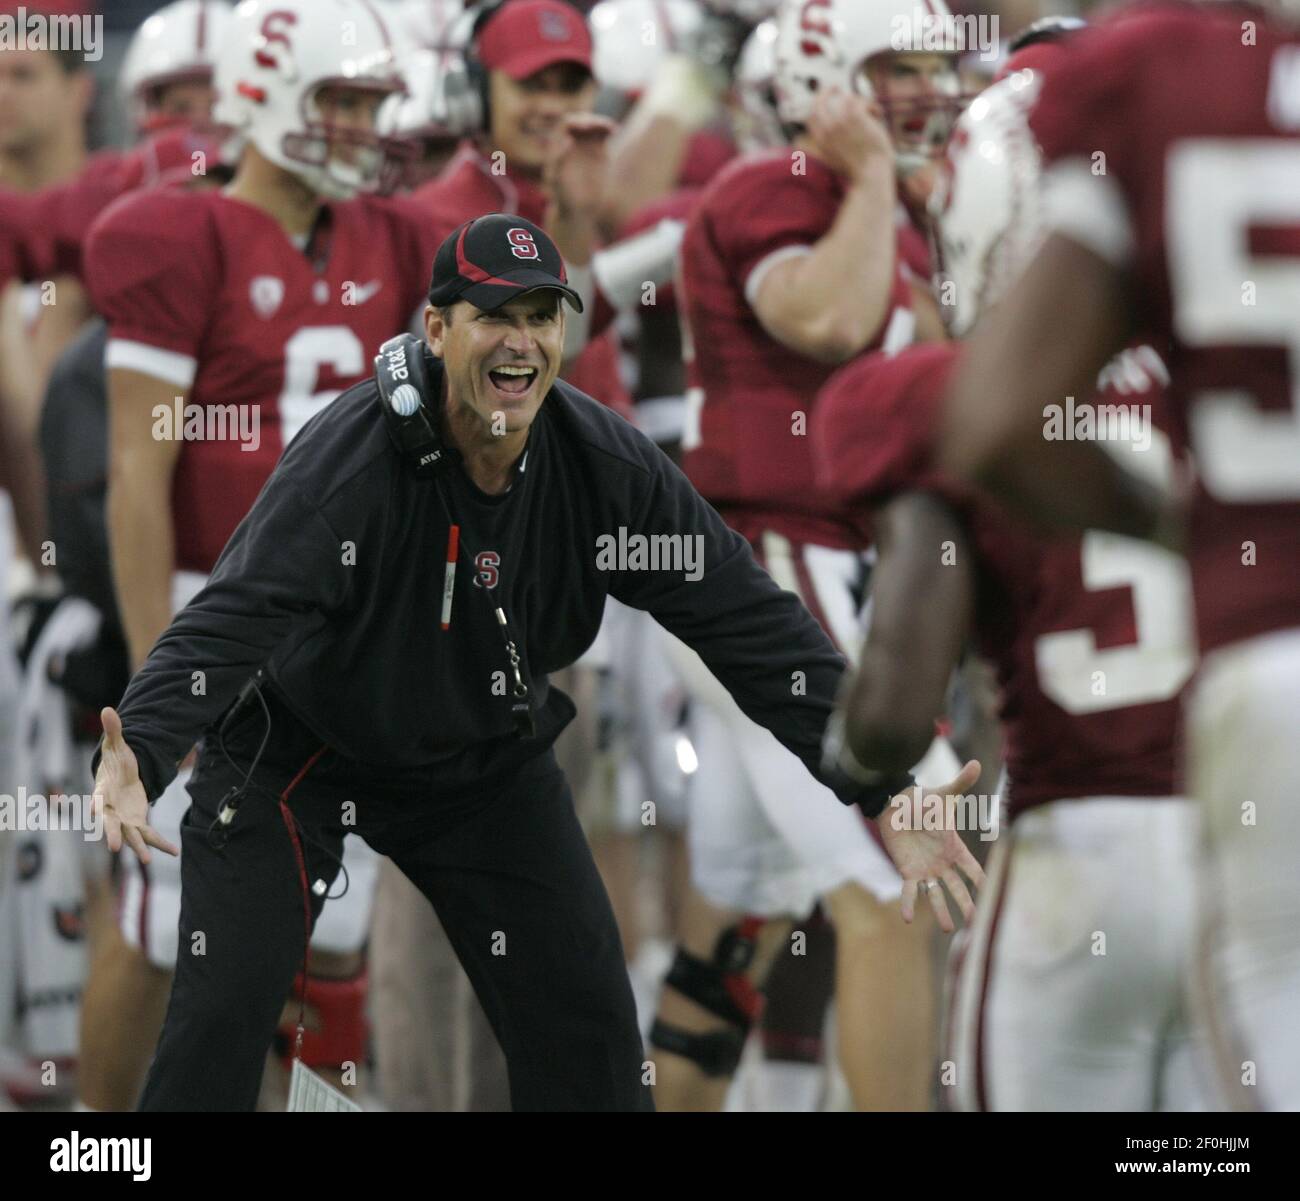 Stanford head coach Jim Harbaugh greets Doug Baldwin after Baldwin's  touchdown reception in the third quarter against Washington State at Stanford  University in Stanford, California, on Saturday, October 23, 2010. Stanford  beat